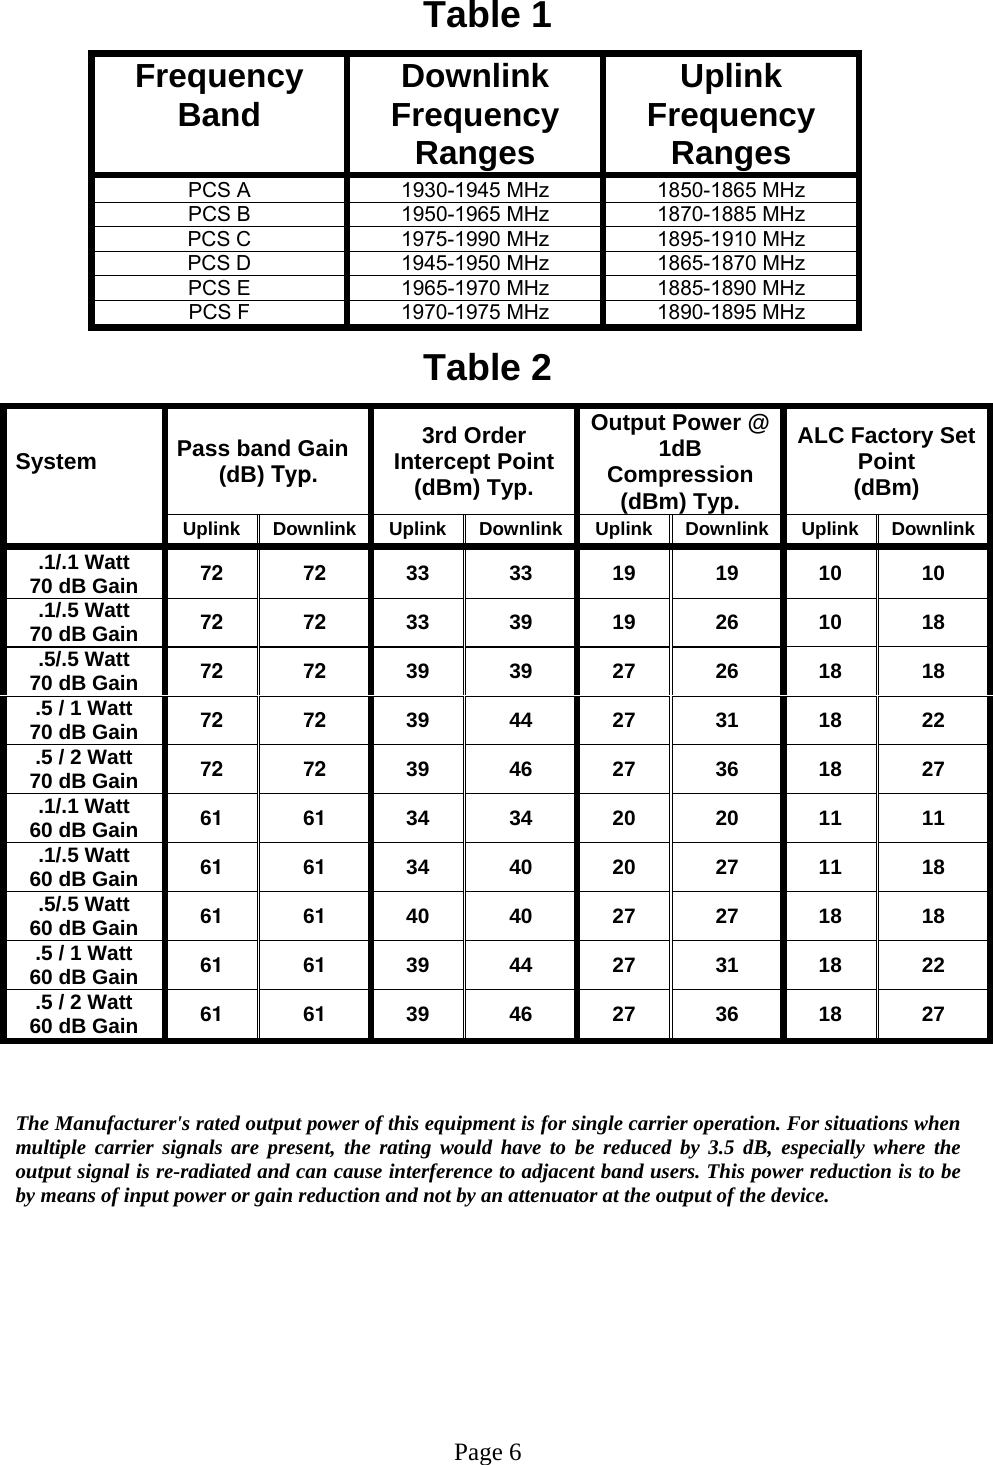 Table 1  Frequency Band  Downlink Frequency Ranges  Uplink    Frequency Ranges  PCS A  1930-1945 MHz  1850-1865 MHz PCS B  1950-1965 MHz  1870-1885 MHz PCS C  1975-1990 MHz  1895-1910 MHz PCS D  1945-1950 MHz  1865-1870 MHz PCS E  1965-1970 MHz  1885-1890 MHz PCS F  1970-1975 MHz  1890-1895 MHz  Table 2  System  Pass band Gain (dB) Typ. 3rd Order Intercept Point (dBm) Typ. Output Power @ 1dB Compression (dBm) Typ. ALC Factory Set Point            (dBm)  Uplink Downlink Uplink Downlink Uplink Downlink Uplink Downlink .1/.1 Watt 70 dB Gain  72 72 33 33 19 19 10 10 .1/.5 Watt 70 dB Gain  72 72 33 39 19 26 10 18 .5/.5 Watt 70 dB Gain  72 72 39 39 27 26 18 18 .5 / 1 Watt 70 dB Gain  72 72 39 44 27 31 18 22 .5 / 2 Watt 70 dB Gain  72 72 39 46 27 36 18 27 .1/.1 Watt 60 dB Gain  61 61 34 34 20 20 11 11 .1/.5 Watt 60 dB Gain  61 61 34 40 20 27 11 18 .5/.5 Watt 60 dB Gain  61 61 40 40 27 27 18 18 .5 / 1 Watt 60 dB Gain  61 61 39 44 27 31 18 22 .5 / 2 Watt 60 dB Gain  61 61 39 46 27 36 18 27    The Manufacturer&apos;s rated output power of this equipment is for single carrier operation. For situations when multiple carrier signals are present, the rating would have to be reduced by 3.5 dB, especially where the output signal is re-radiated and can cause interference to adjacent band users. This power reduction is to be by means of input power or gain reduction and not by an attenuator at the output of the device.         Page 6 